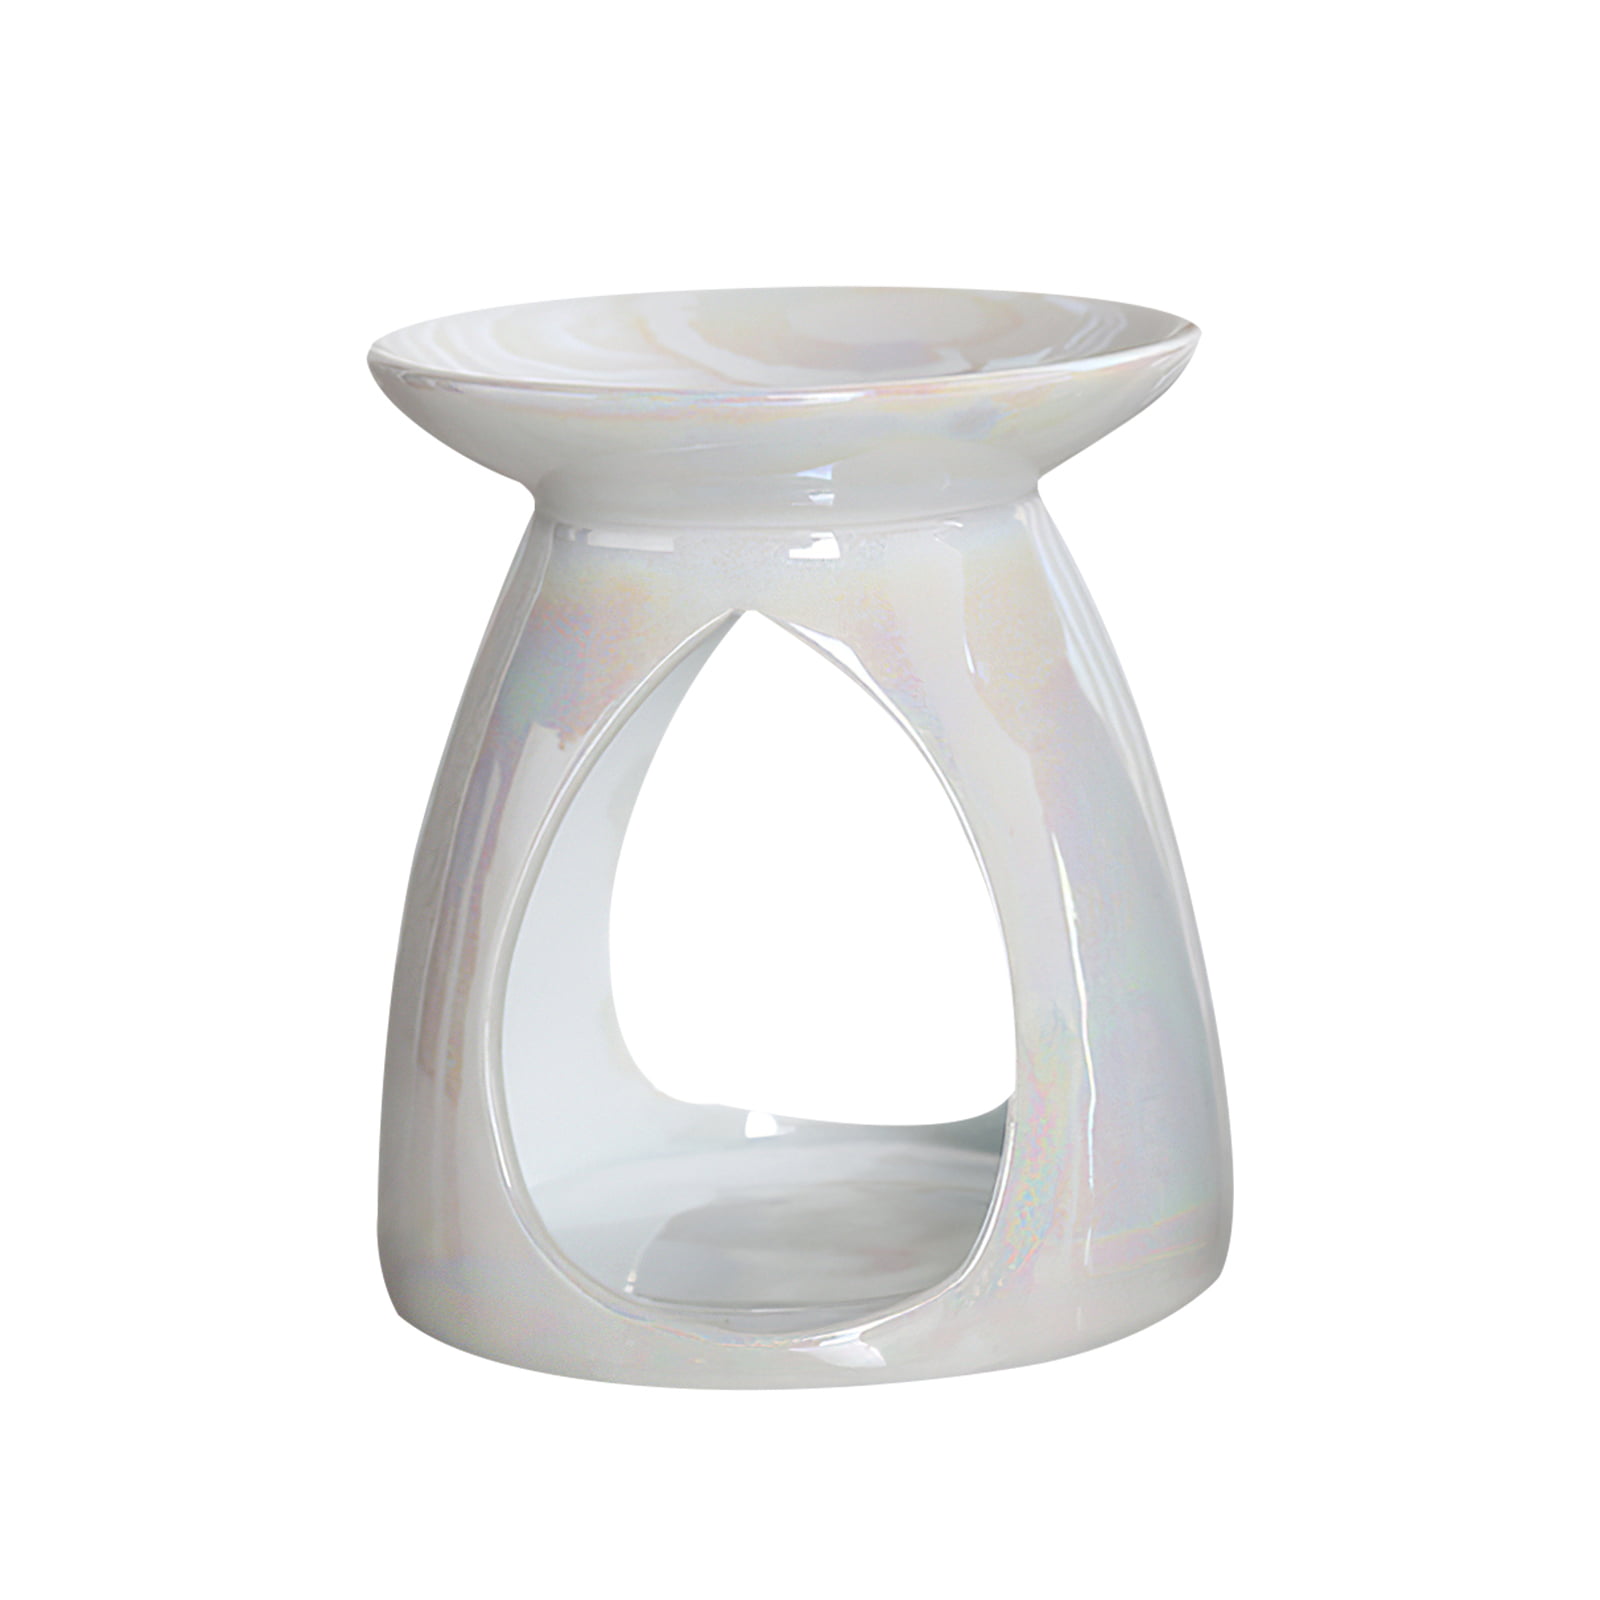 Oil & Wax melt Ceramic Burner with a Shimmering Pearlecent finish